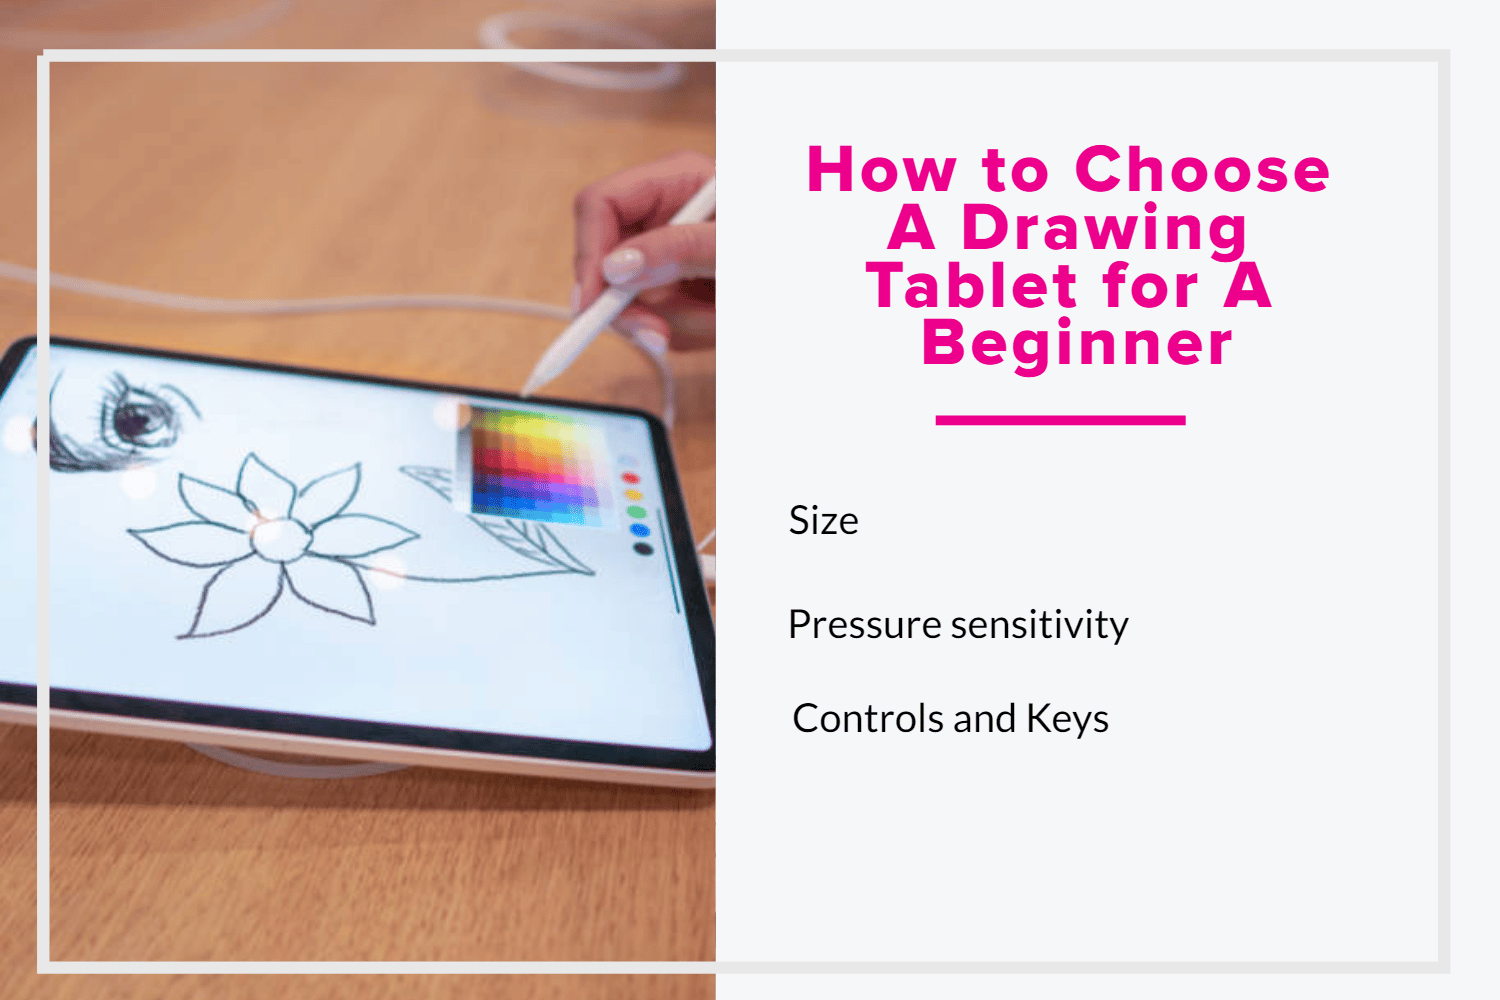 https://justcreative.com/wp-content/uploads/2022/04/How-to-choose-a-drawing-tablet-for-a-beginner.png